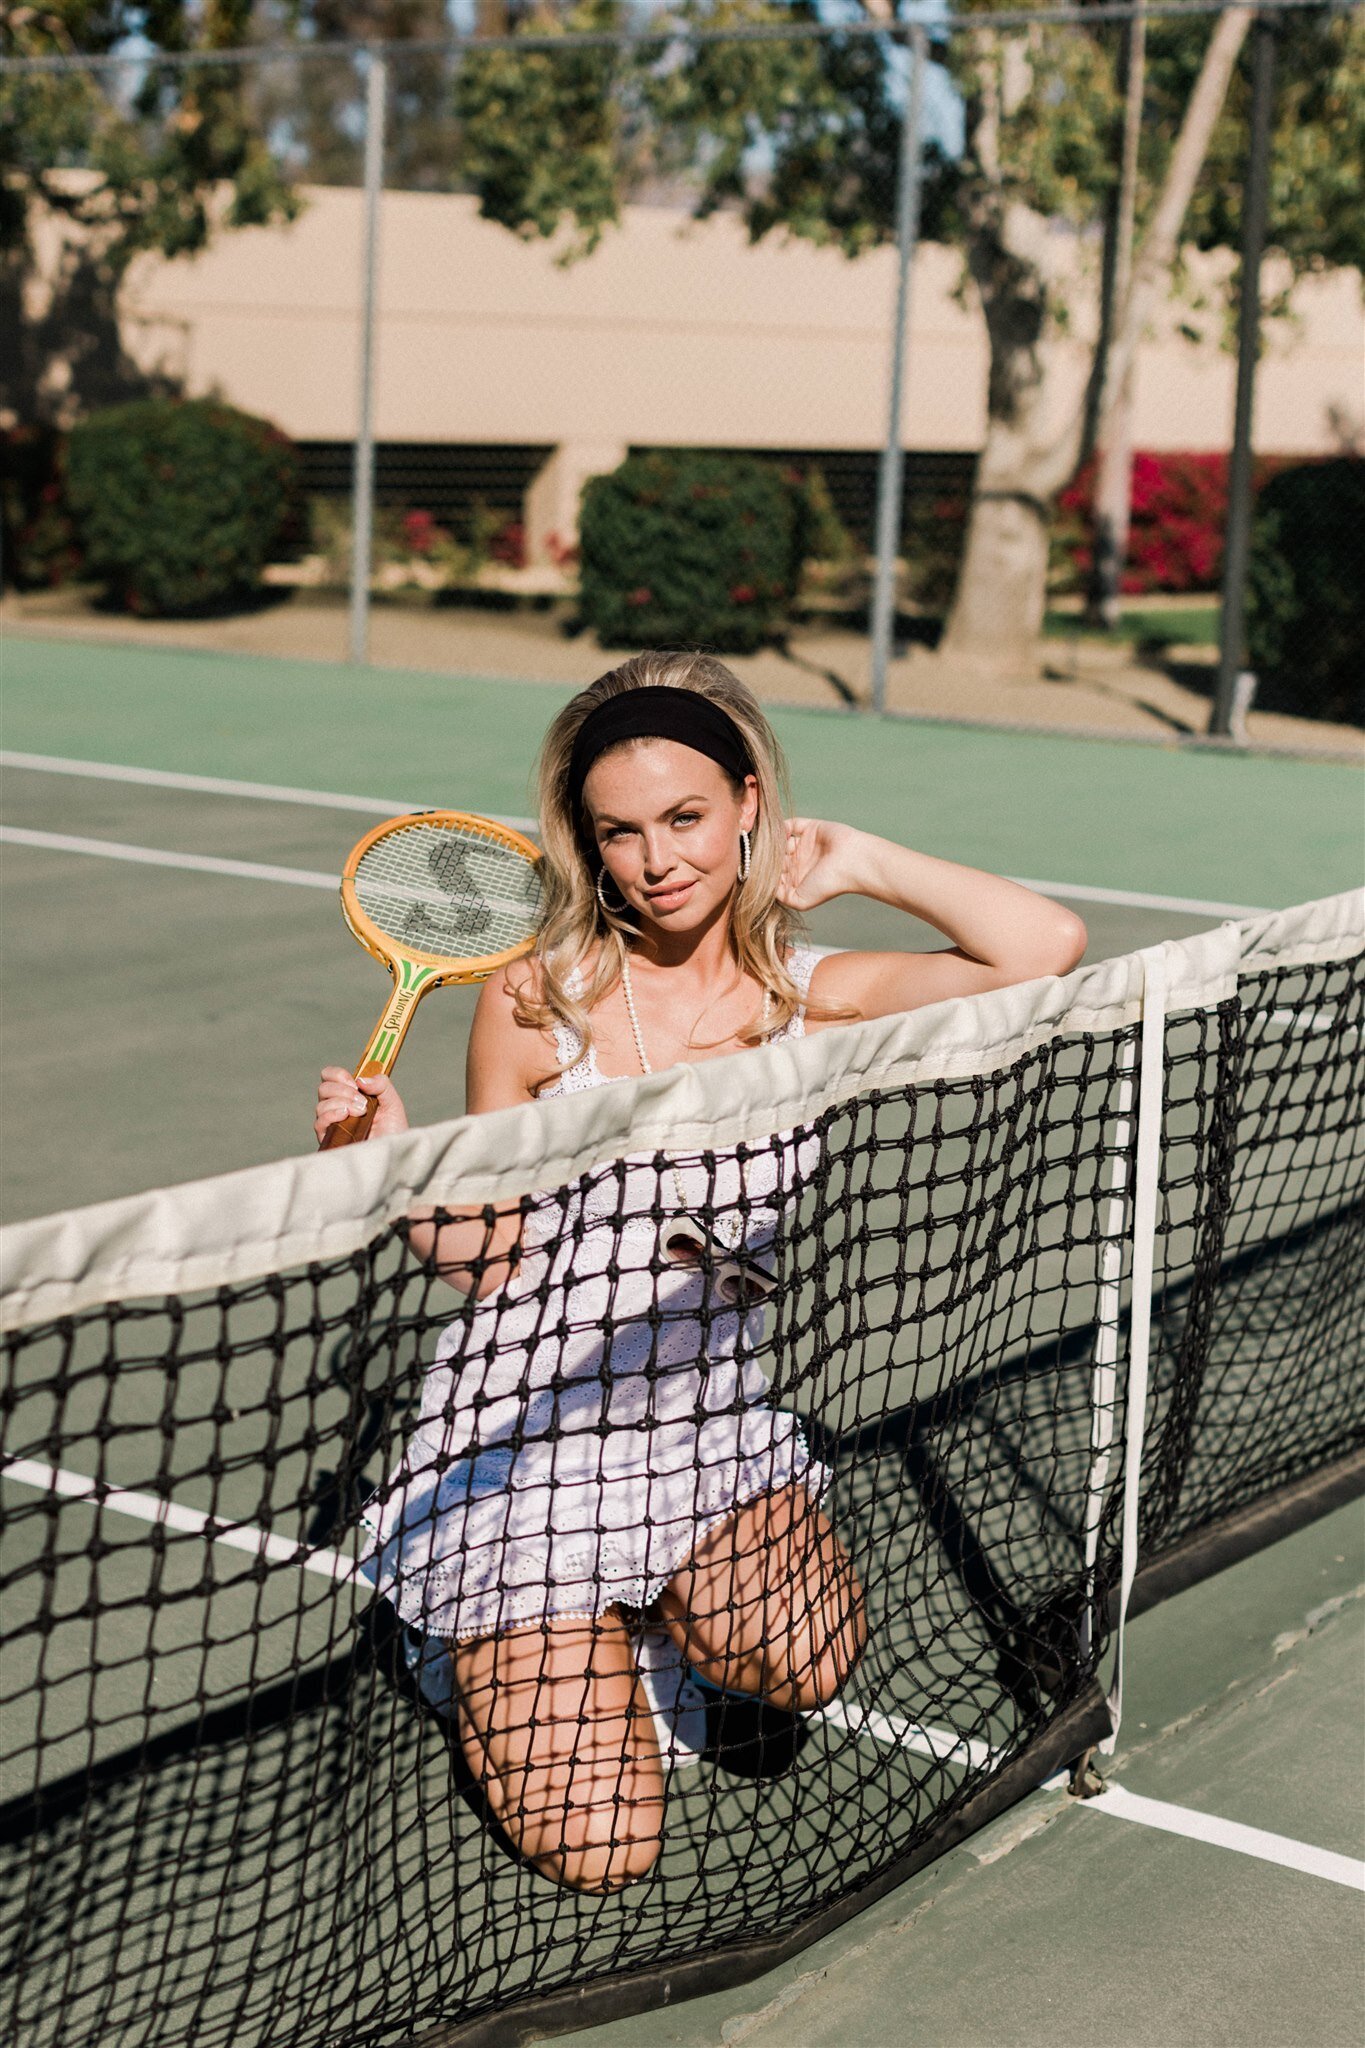 Trace Henningsen Tennis-Valorie Darling Photography-DF1A9903